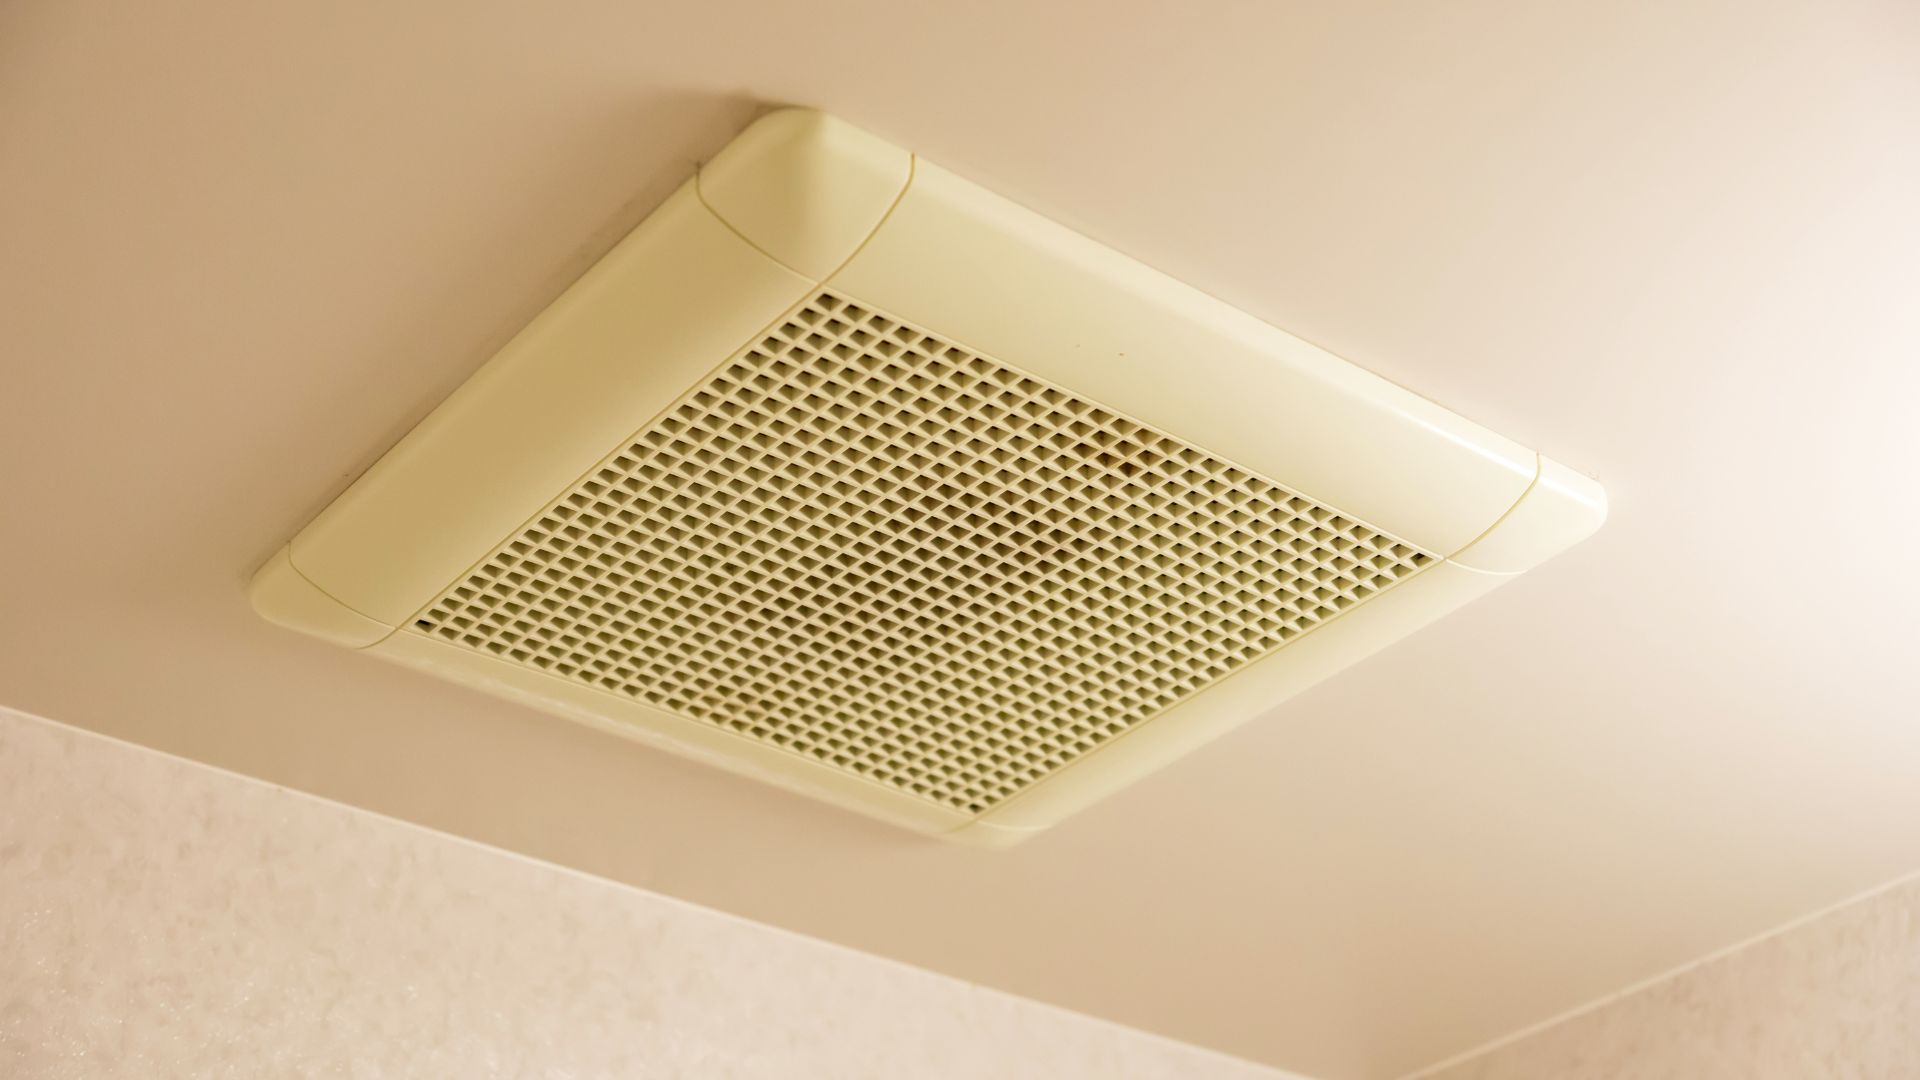 Advantages of Installing an Exhaust Fan: Electrical Services for Improved Ventilation